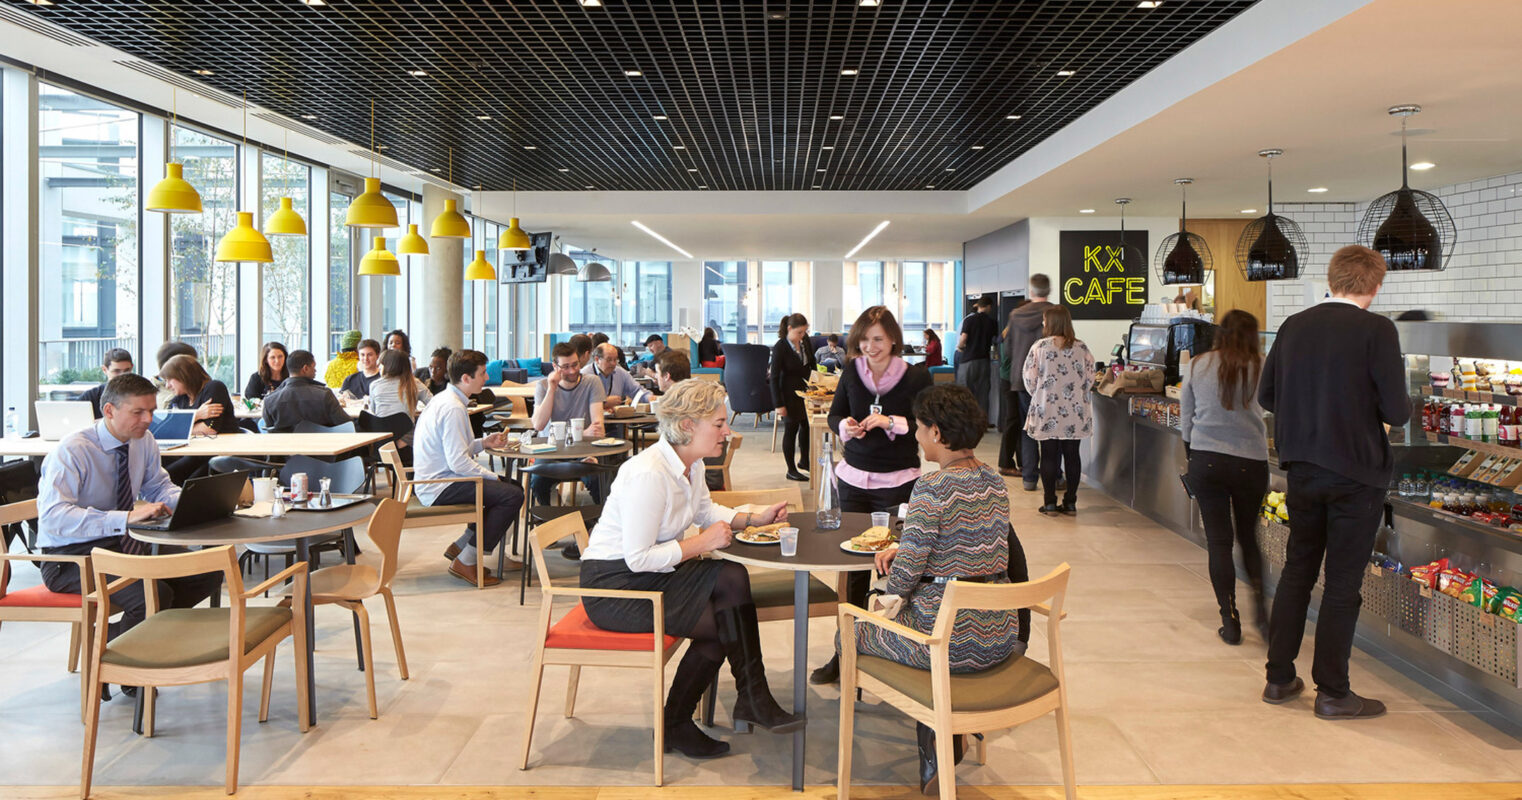 Spacious café interior featuring a mix of communal and individual seating arrangements. Modern lighting with bright yellow pendants illuminates the space, while a sleek black grid ceiling adds a contemporary feel. Patrons engage at counters and tables in a bustling yet inviting atmosphere.